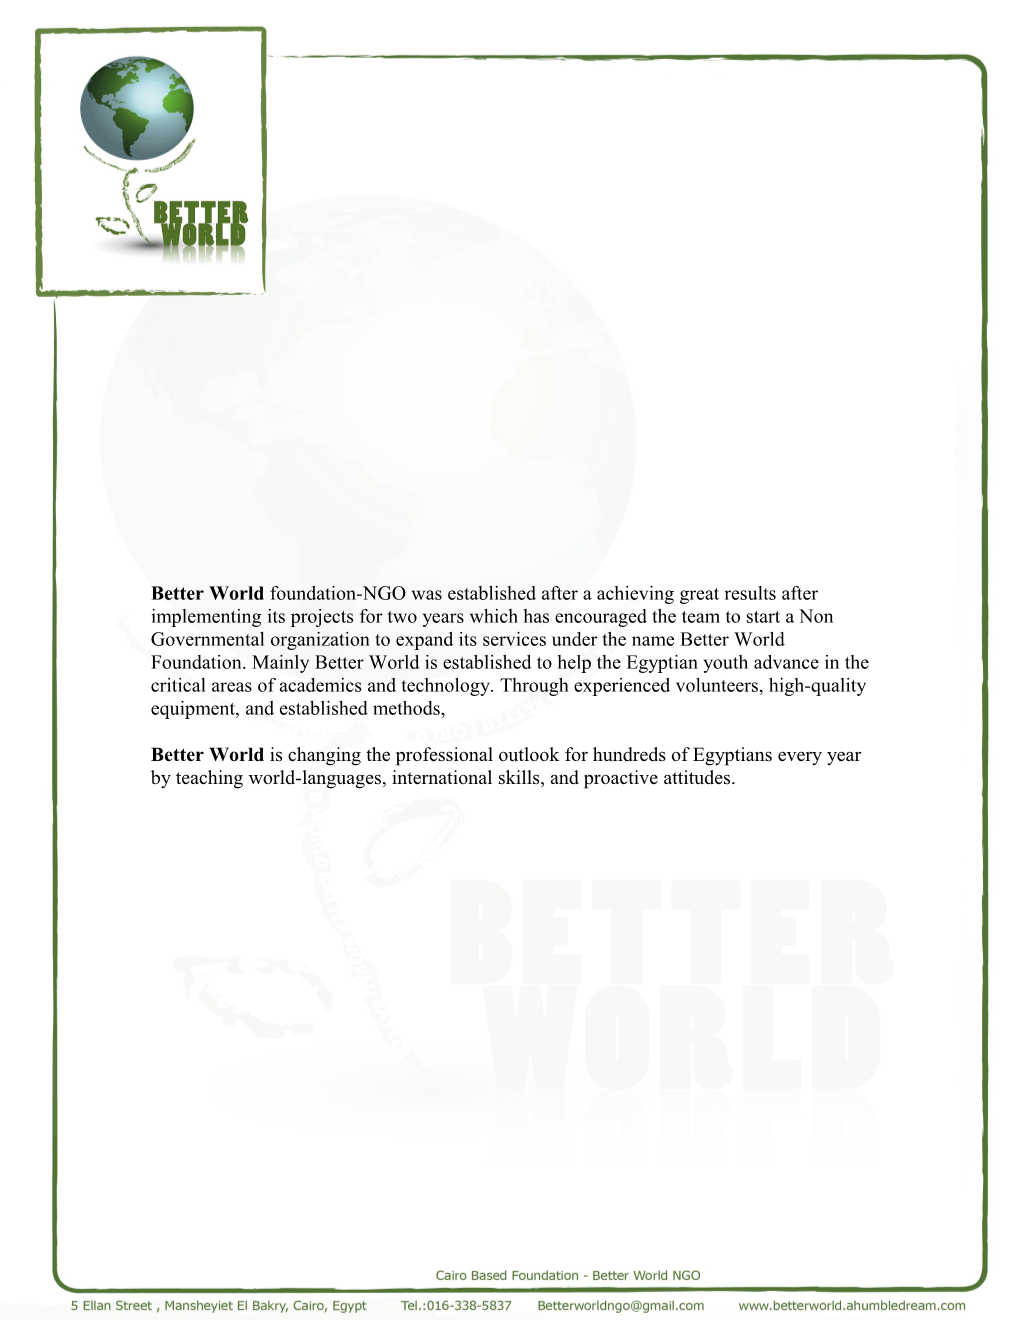 Better World Foundation-NGO Was Established After a Achieving Great Results After Implementing